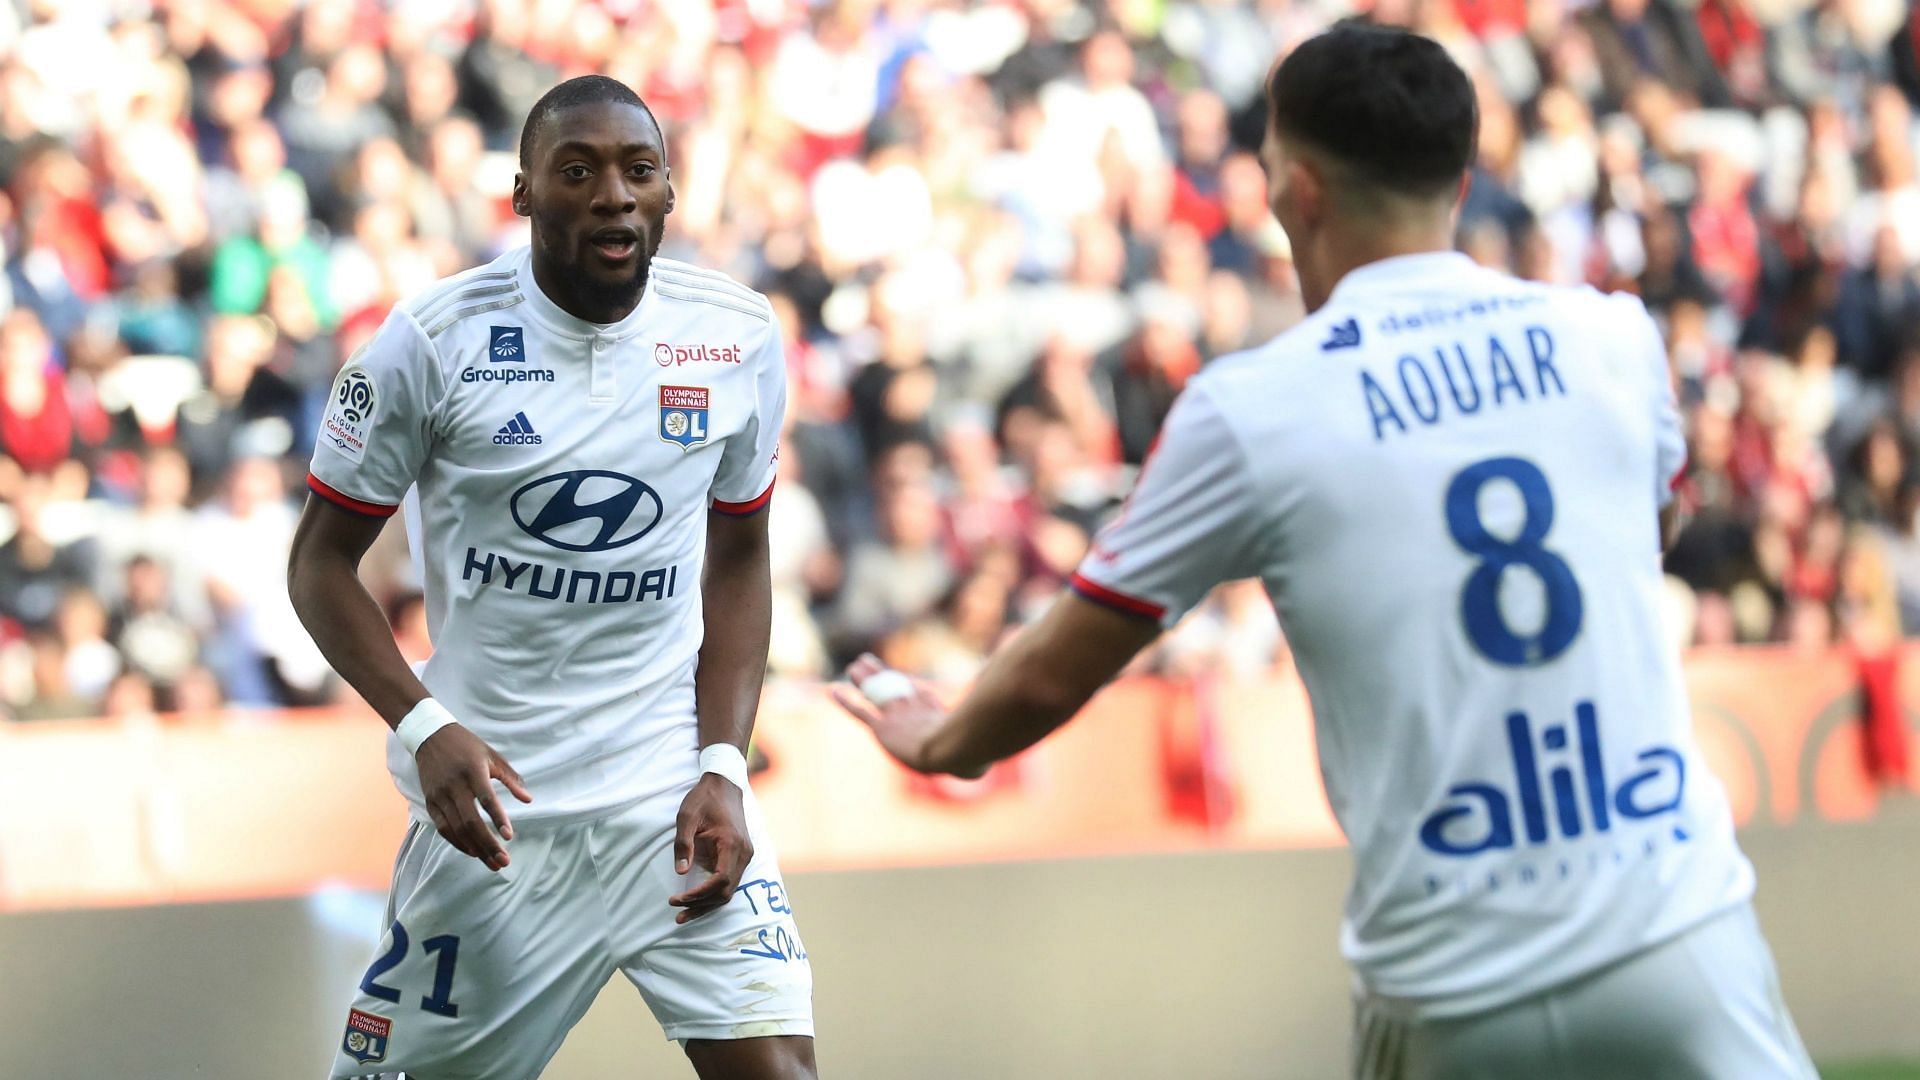 Can Lyon overcome Marseille in a big Ligue 1 match this weekend?